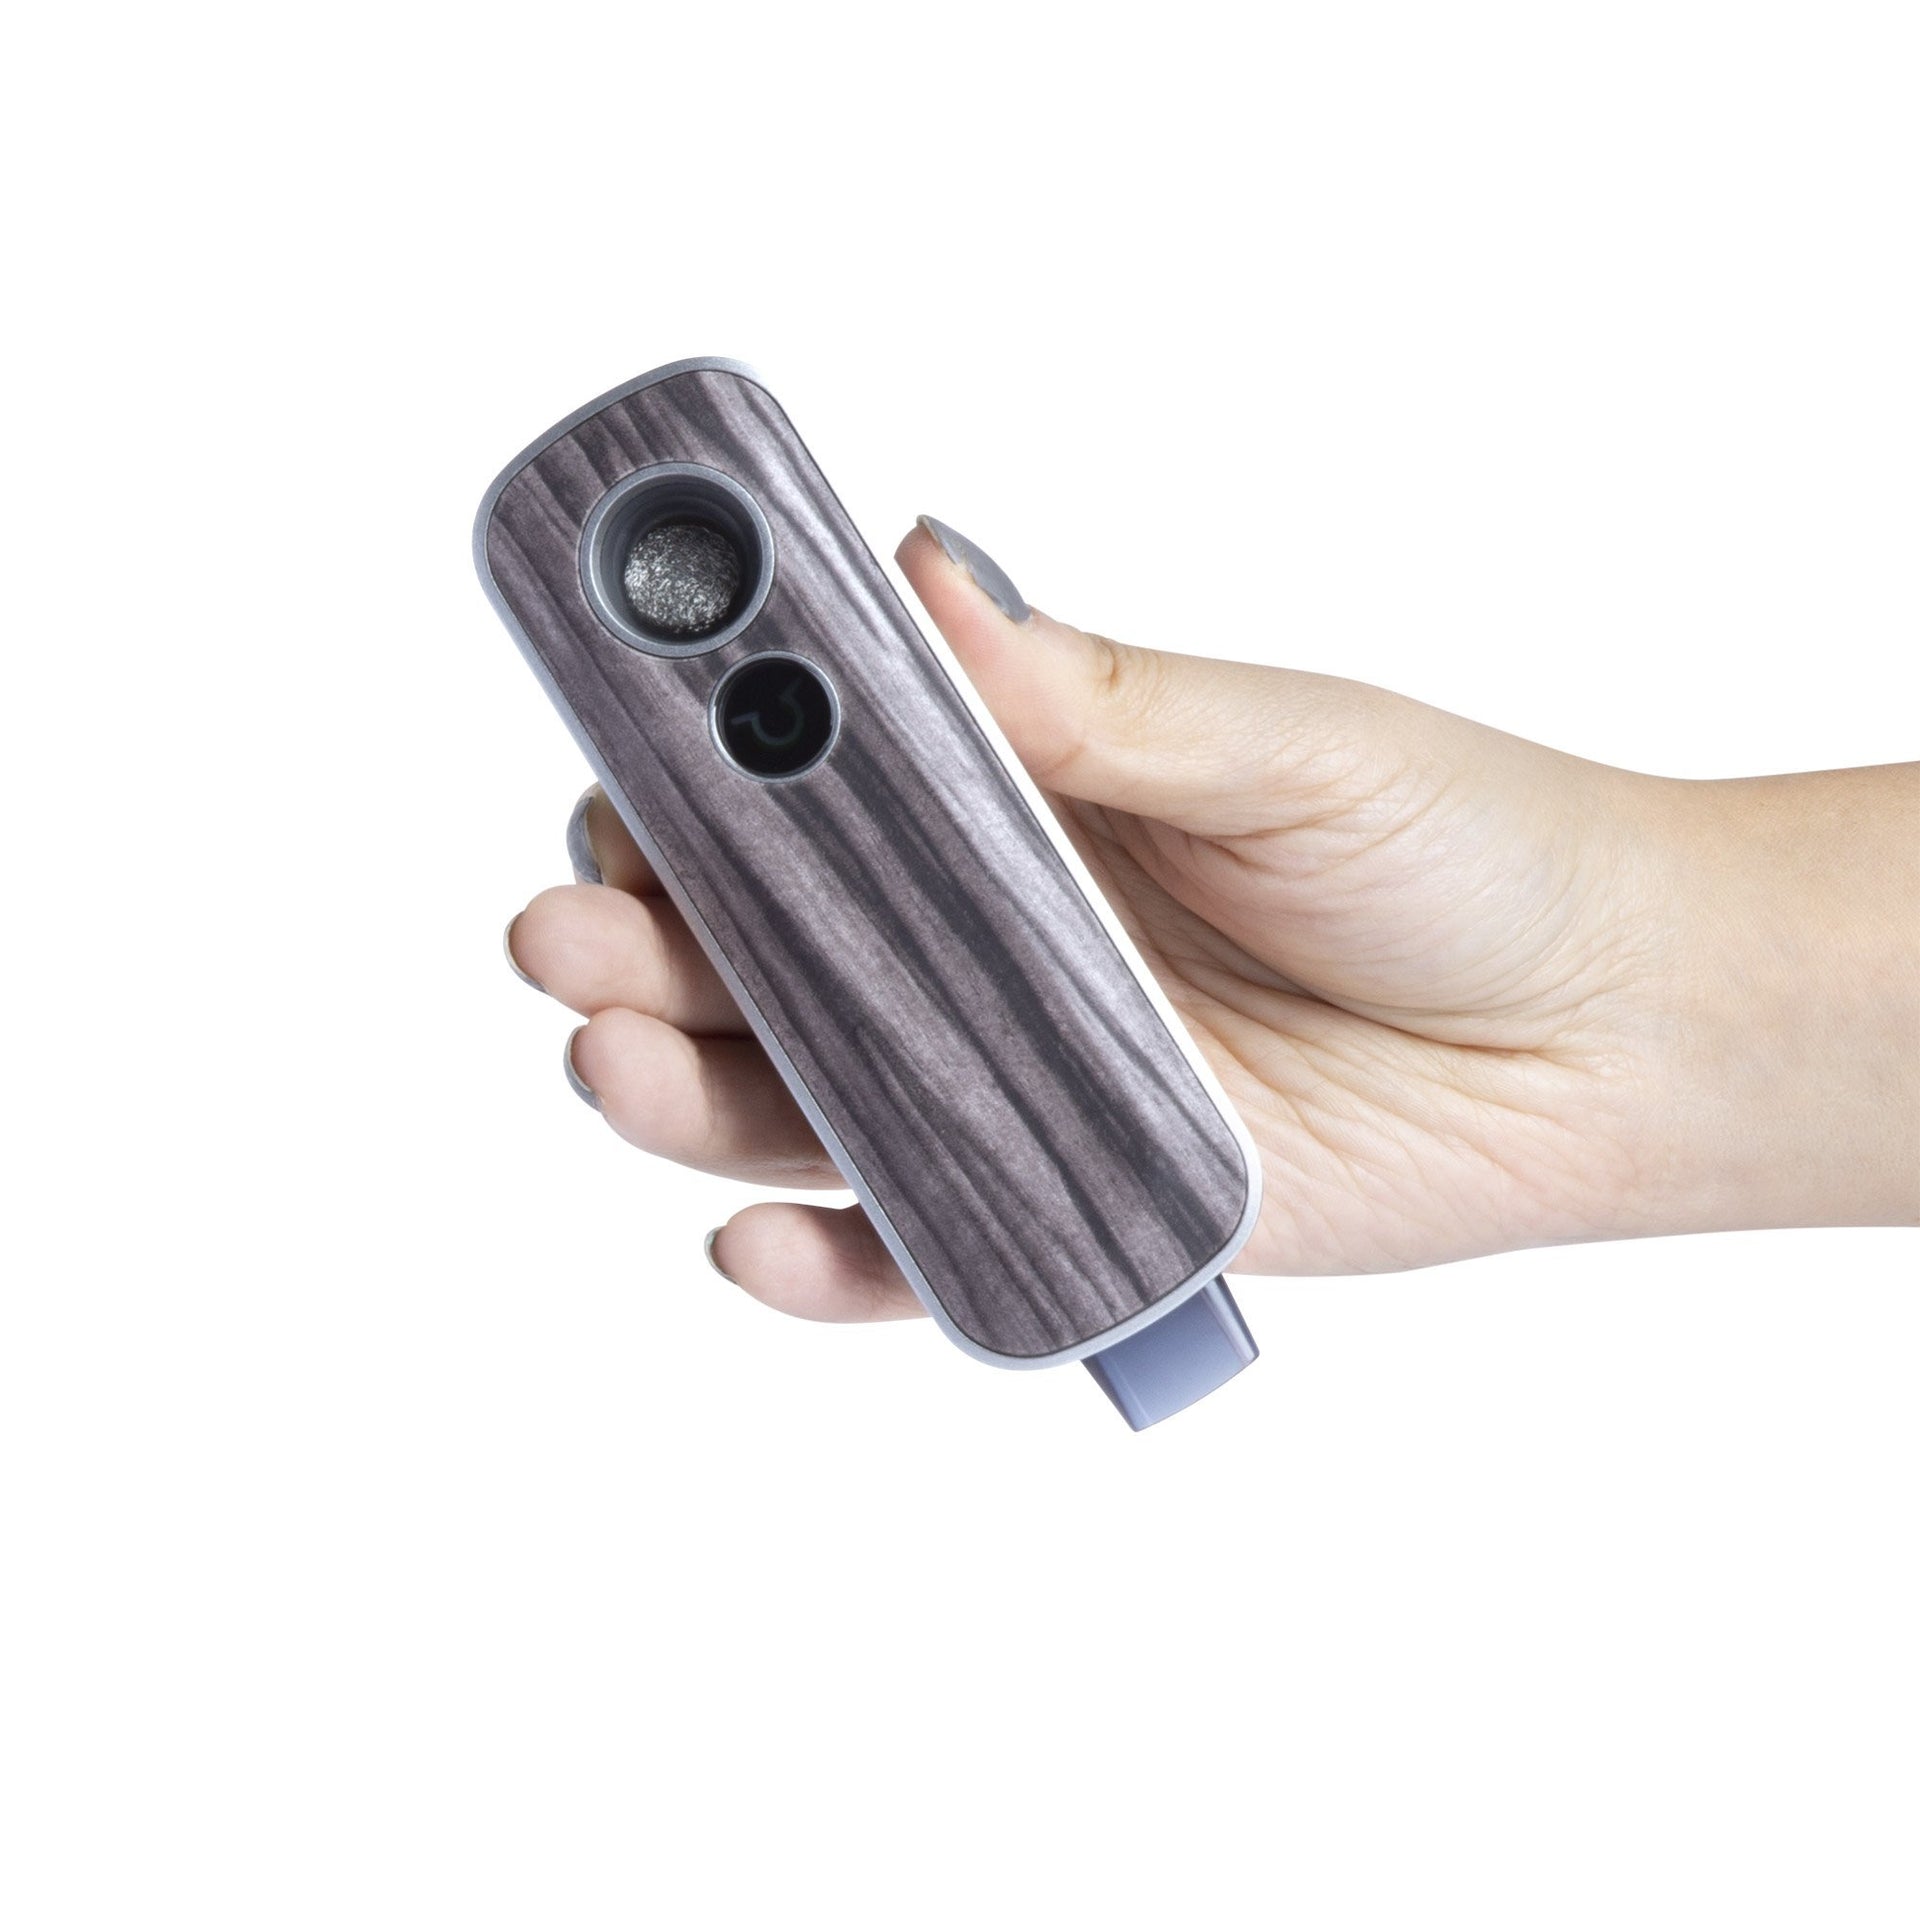 Firefly 2 Plus Dry Herb Vaporizer / $ 249.99 at 420 Science